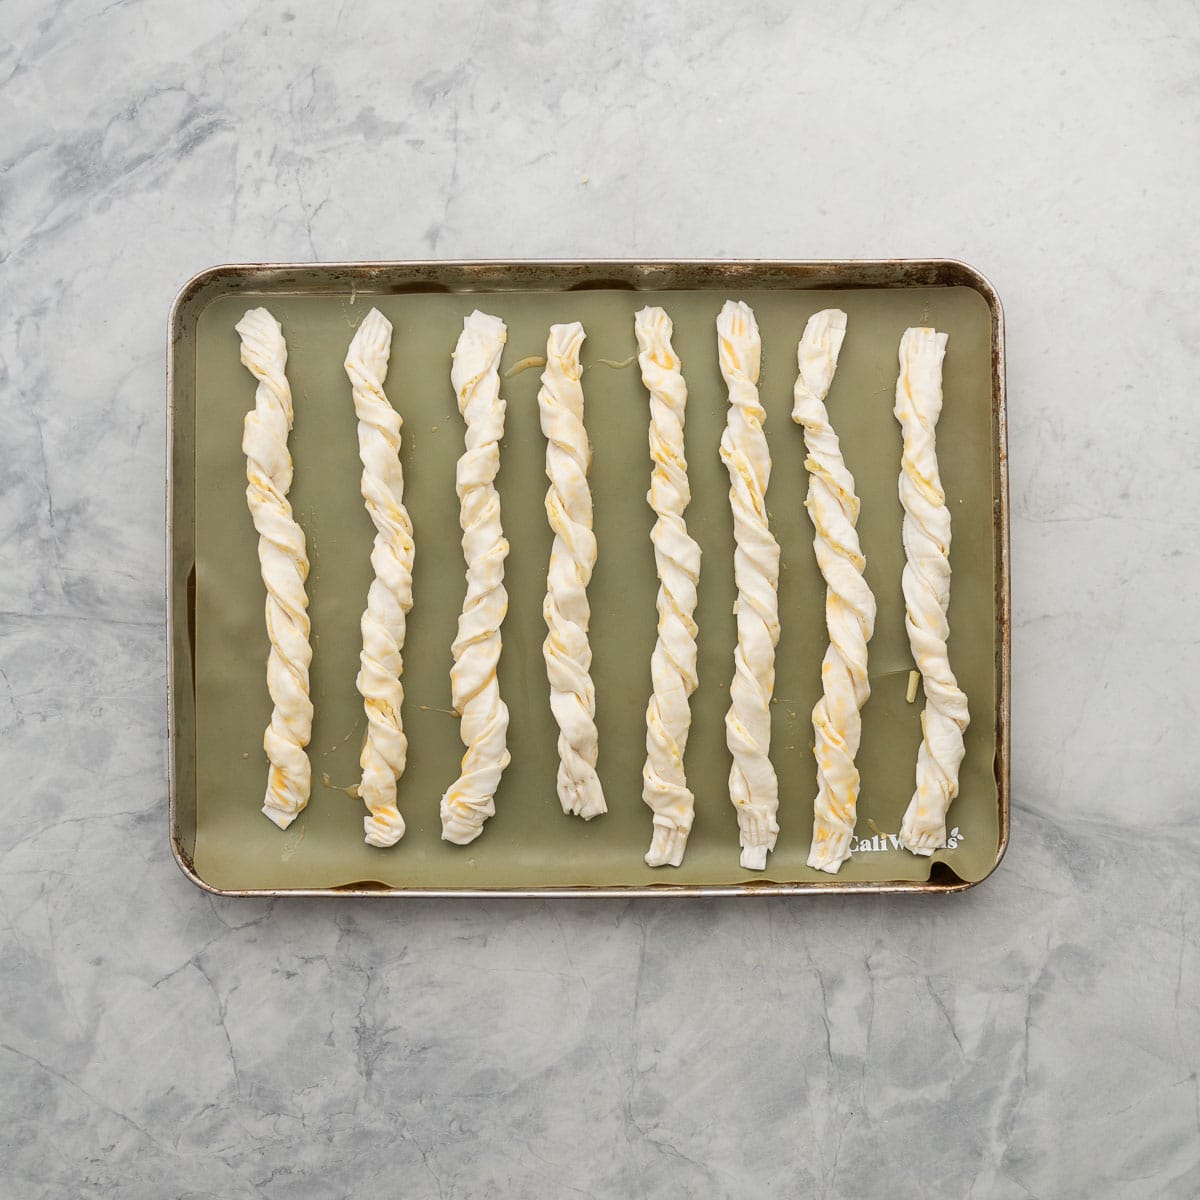 Puff pastry cheese straws on a silicone baking mat ready to go into the oven 